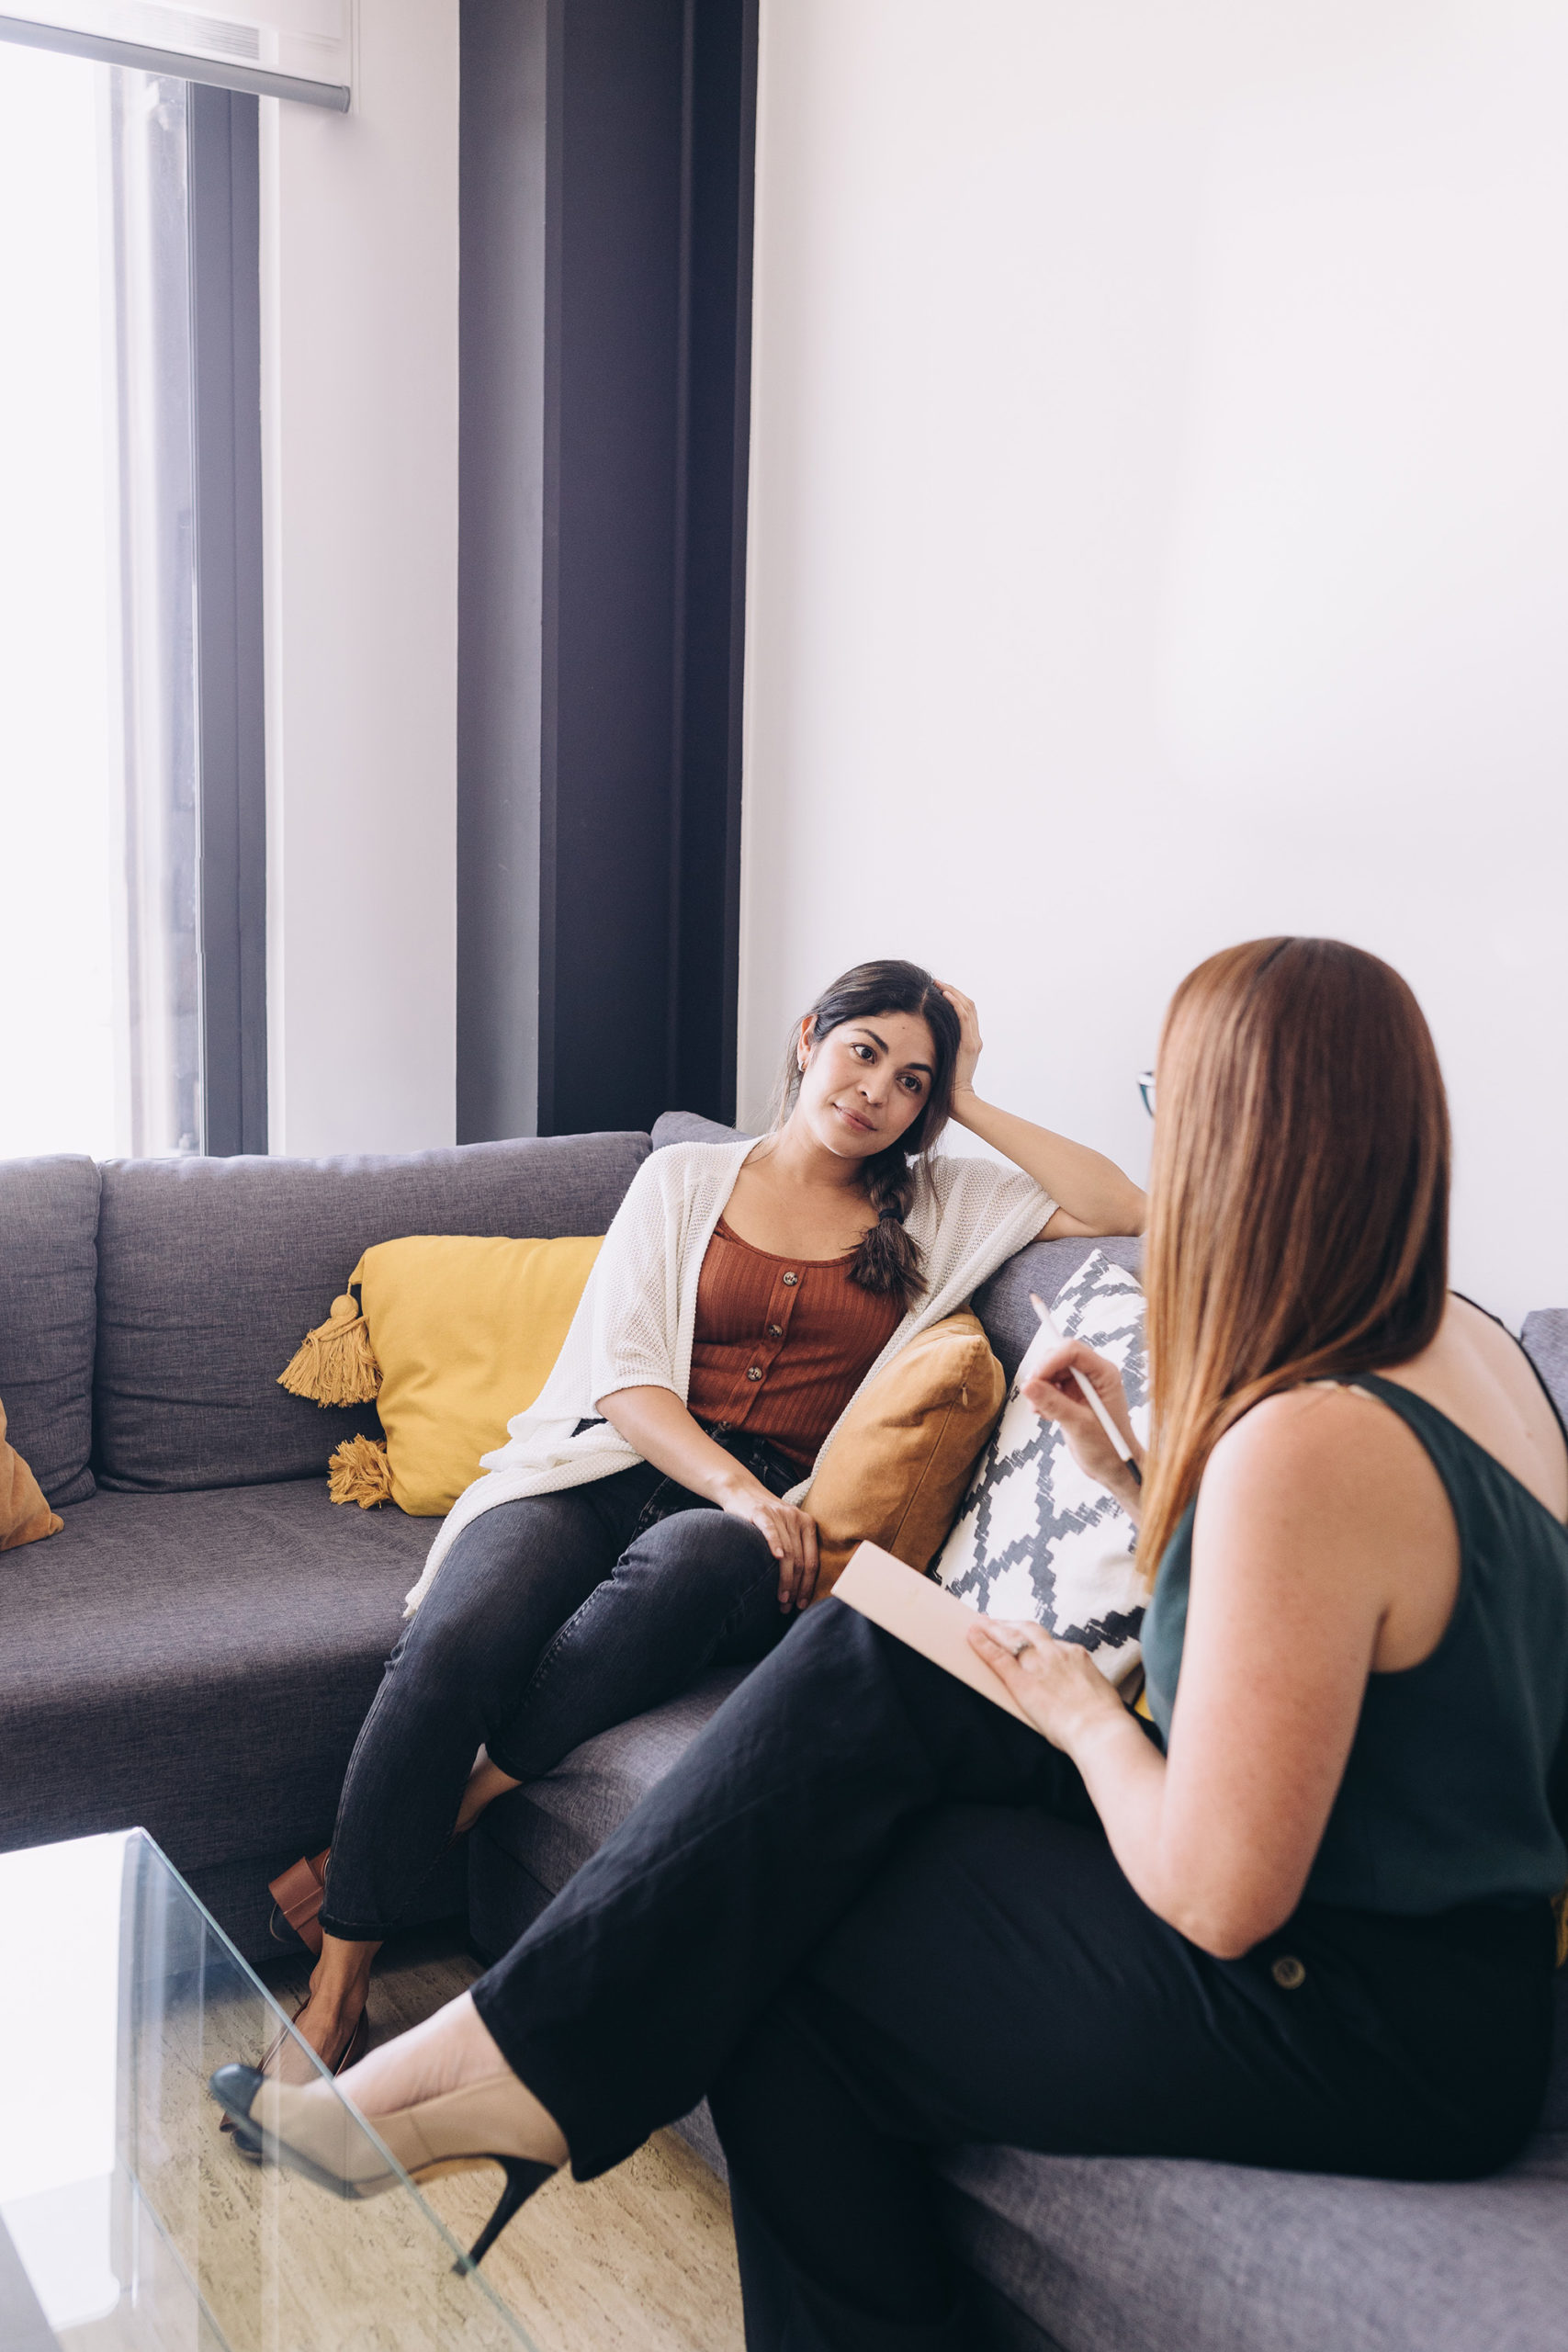 Women talking on couch during counseling session